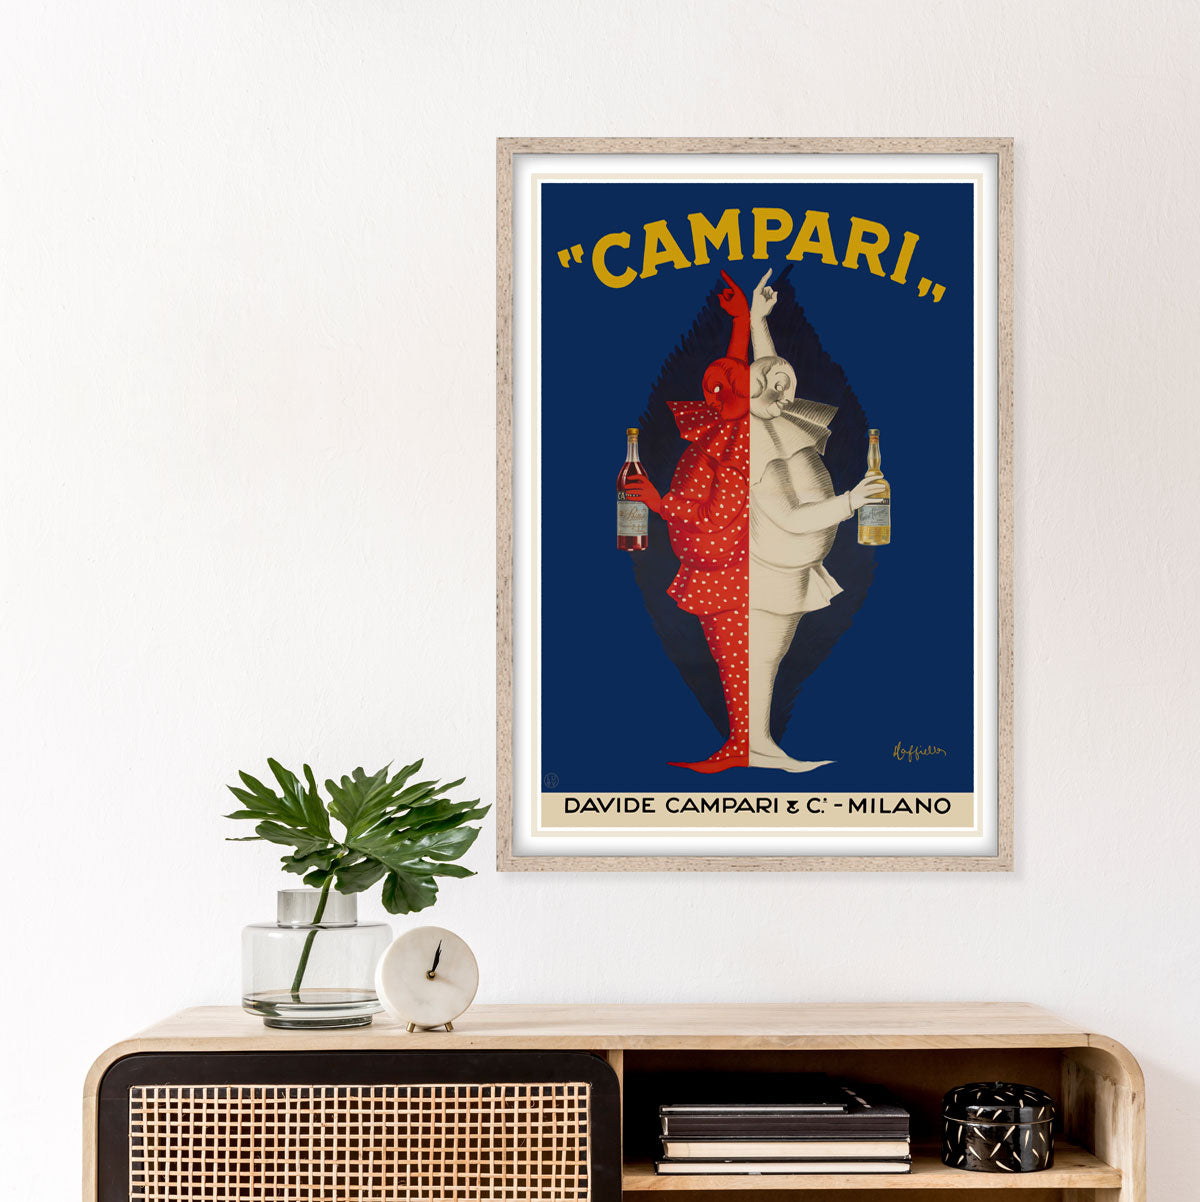 Campari Milano retro vintage advertising poster from Places We Luv